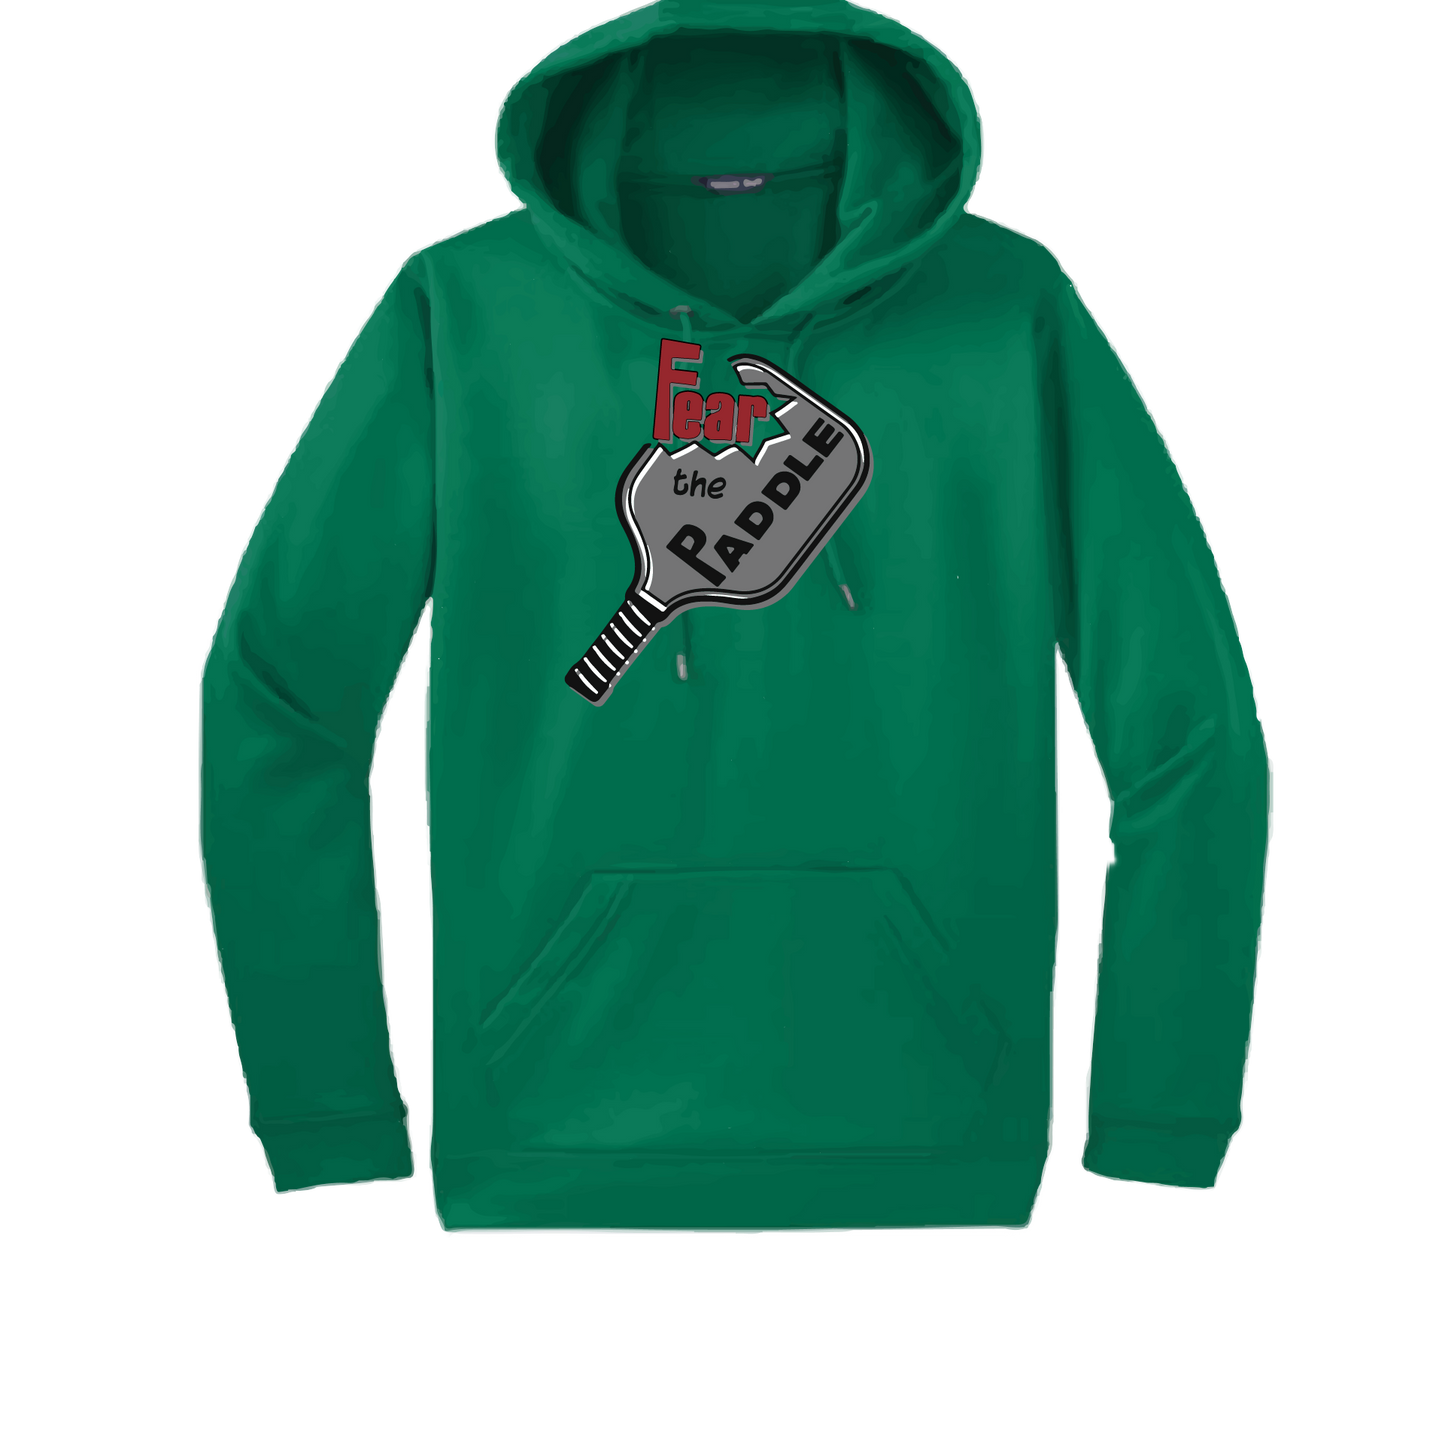 Pickleball Design: Fear the Paddle  Unisex Hooded Sweatshirt: Moisture-wicking, double-lined hood, front pouch pocket.  This unisex hooded sweatshirt is ultra comfortable and soft. Stay warm on the Pickleball courts while being that hit with this one of kind design.